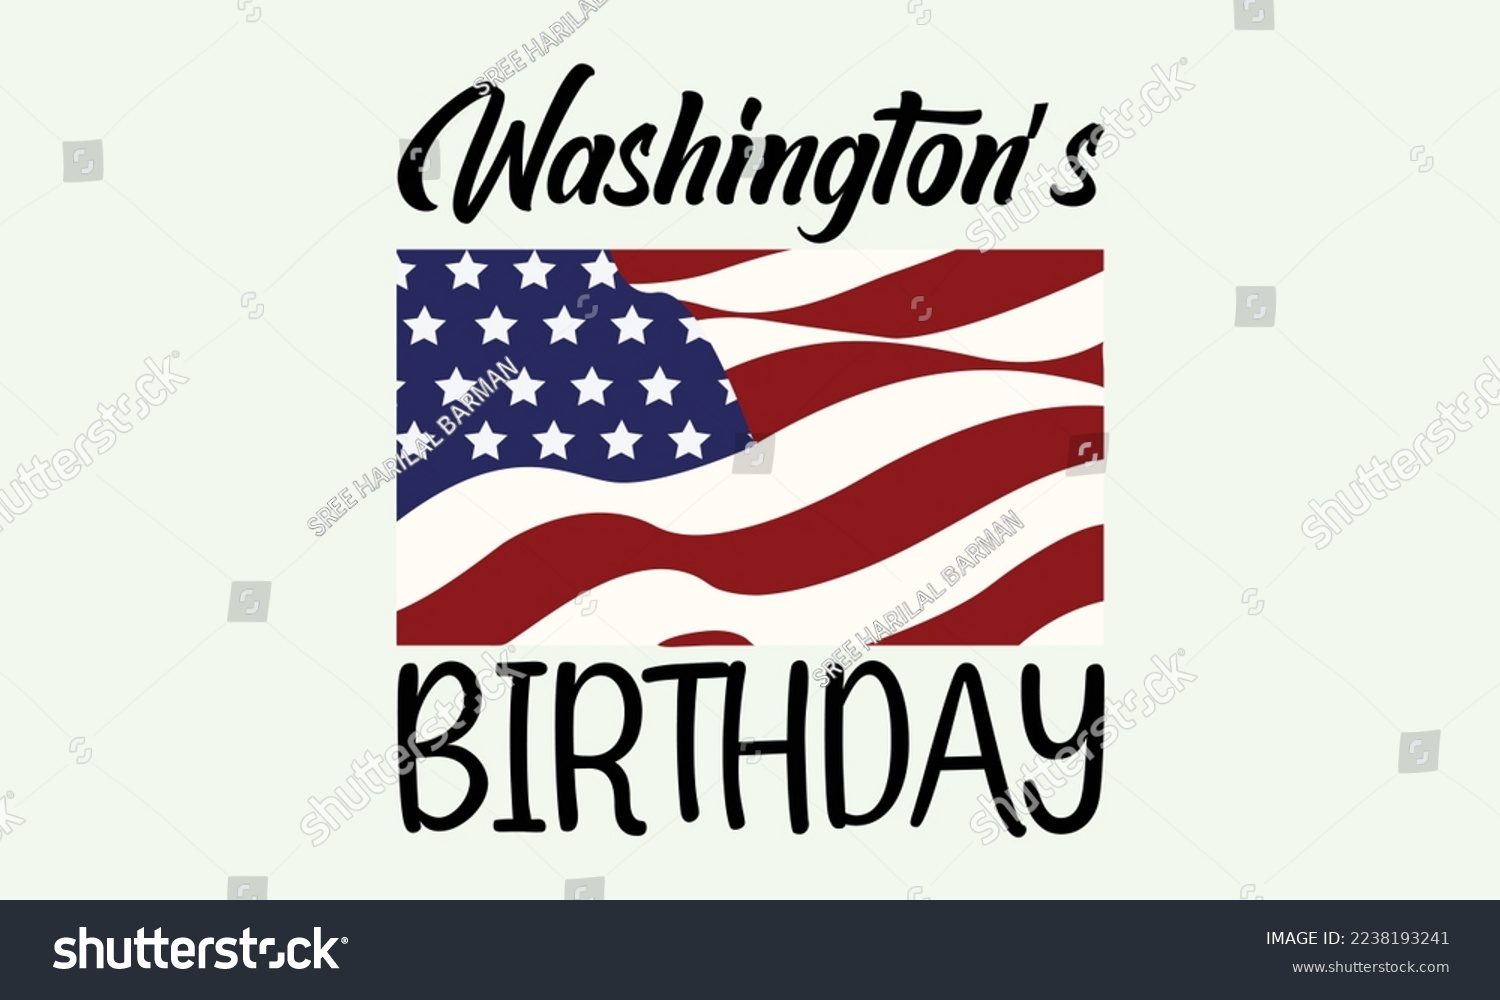 SVG of Washington’s birthday - President's day T-shirt Design, File Sports SVG Design, Sports typography t-shirt design, For stickers, Templet, mugs, etc. for Cutting, cards, and flyers. svg